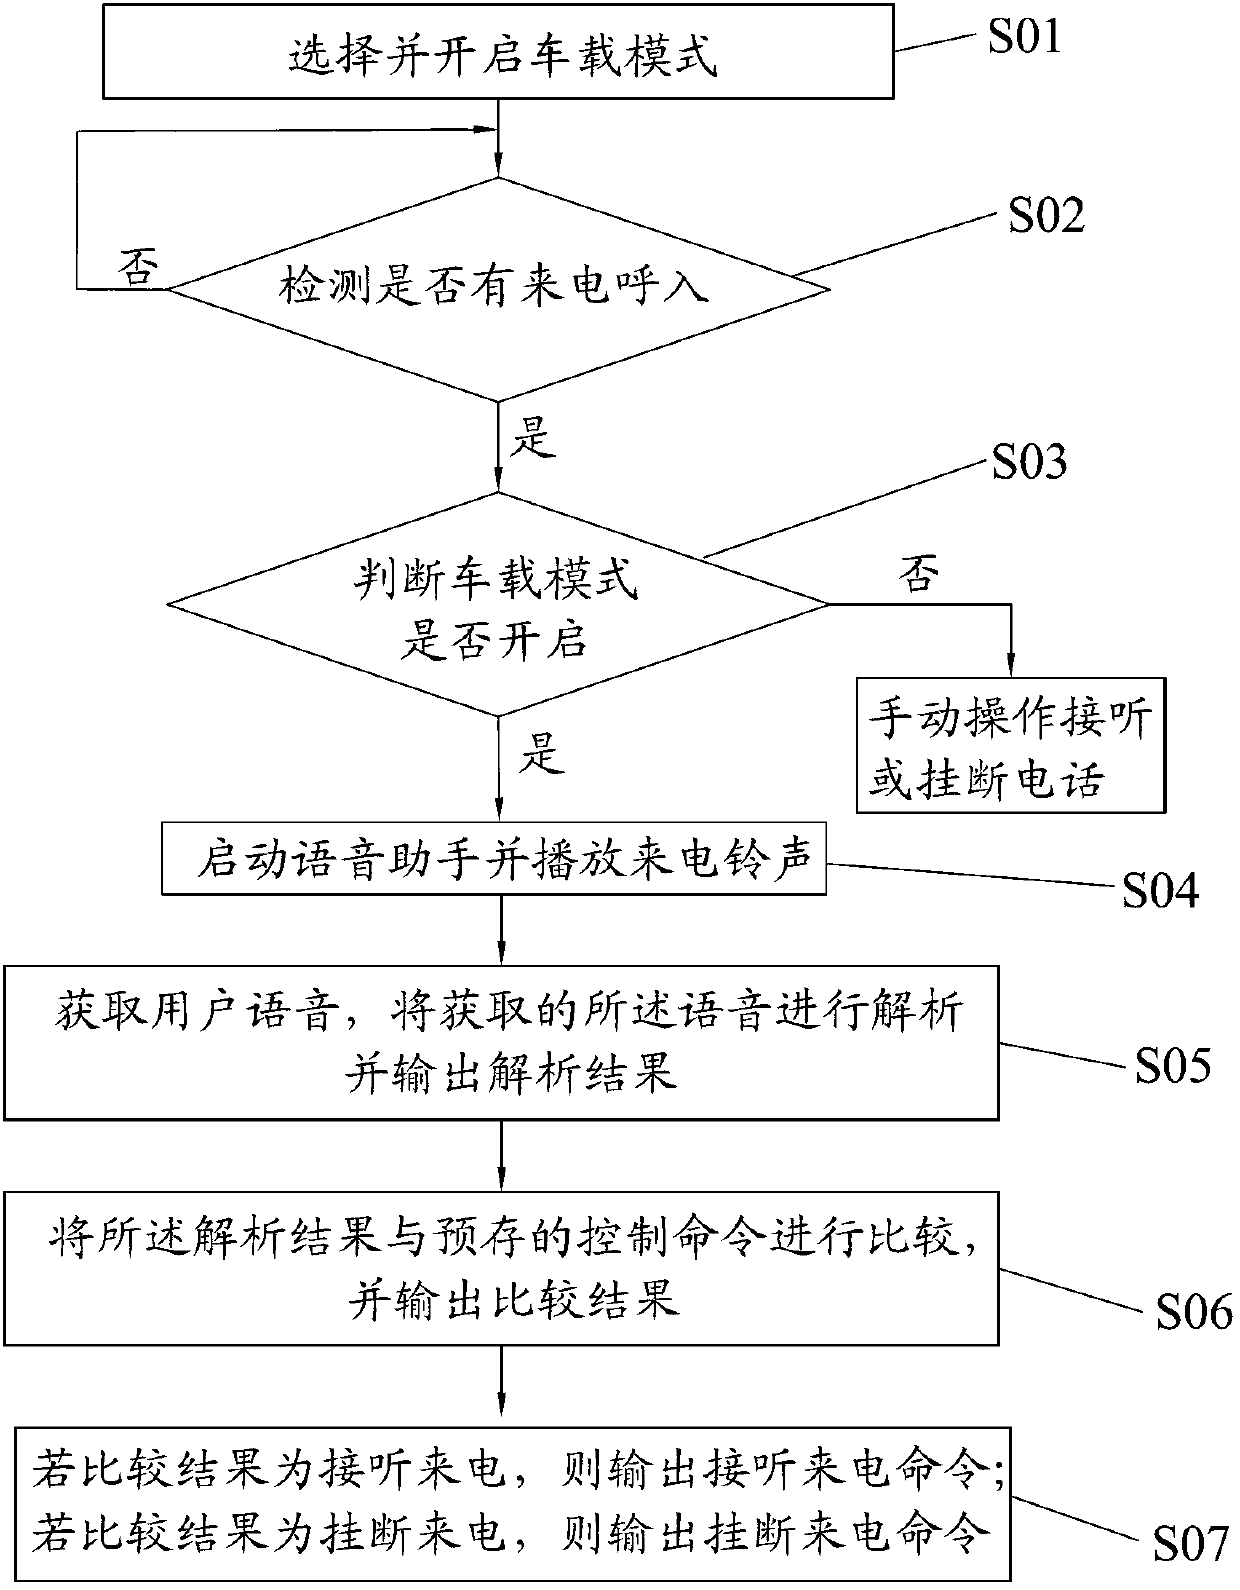 Mobile terminal phone call answering method and mobile terminal